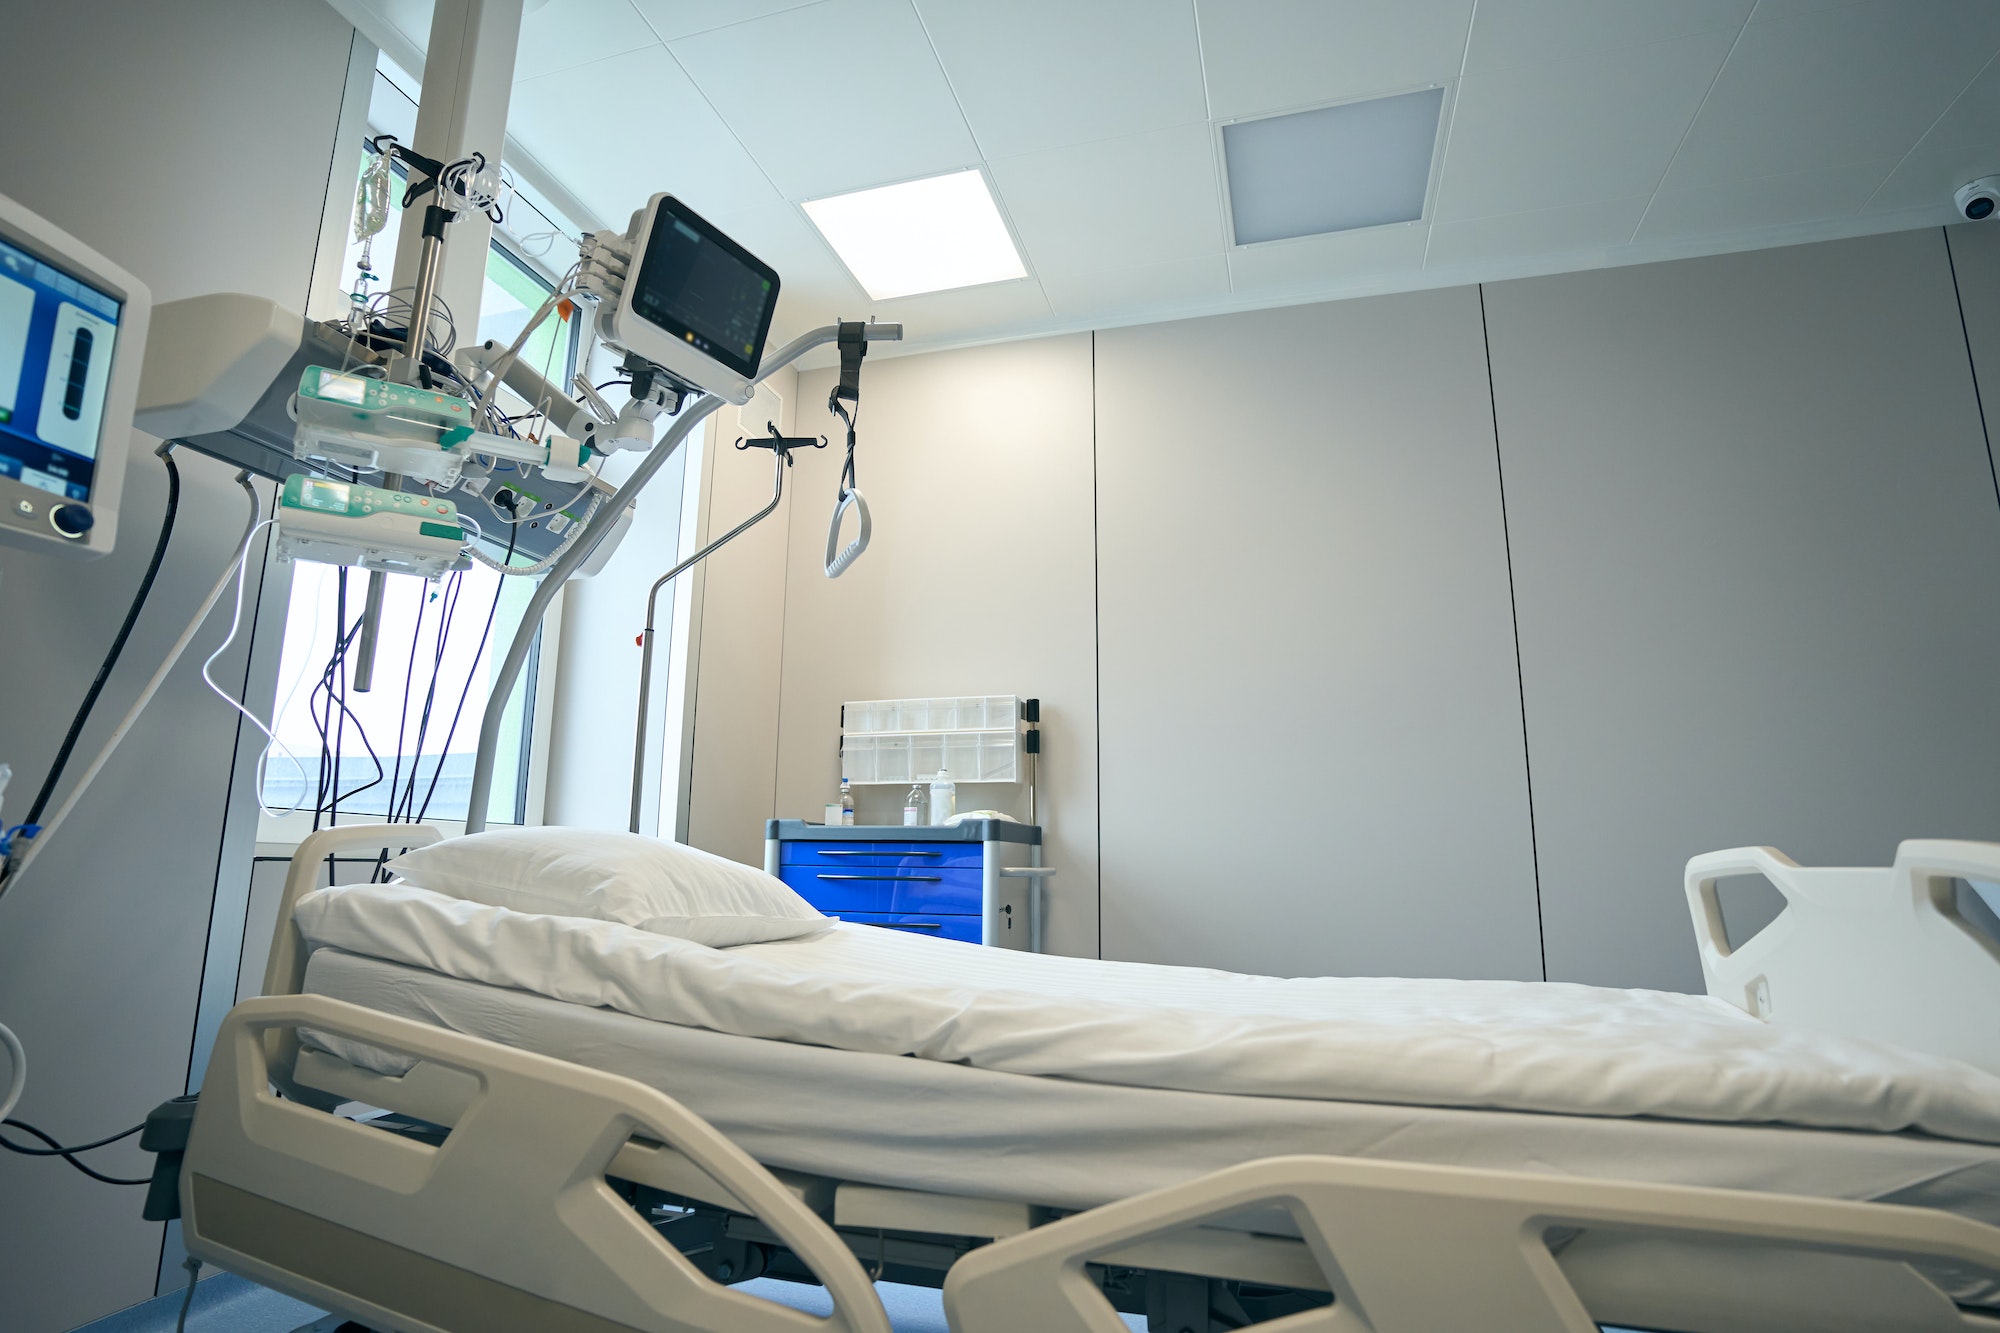 Room for patient treatment and recovery in hospital